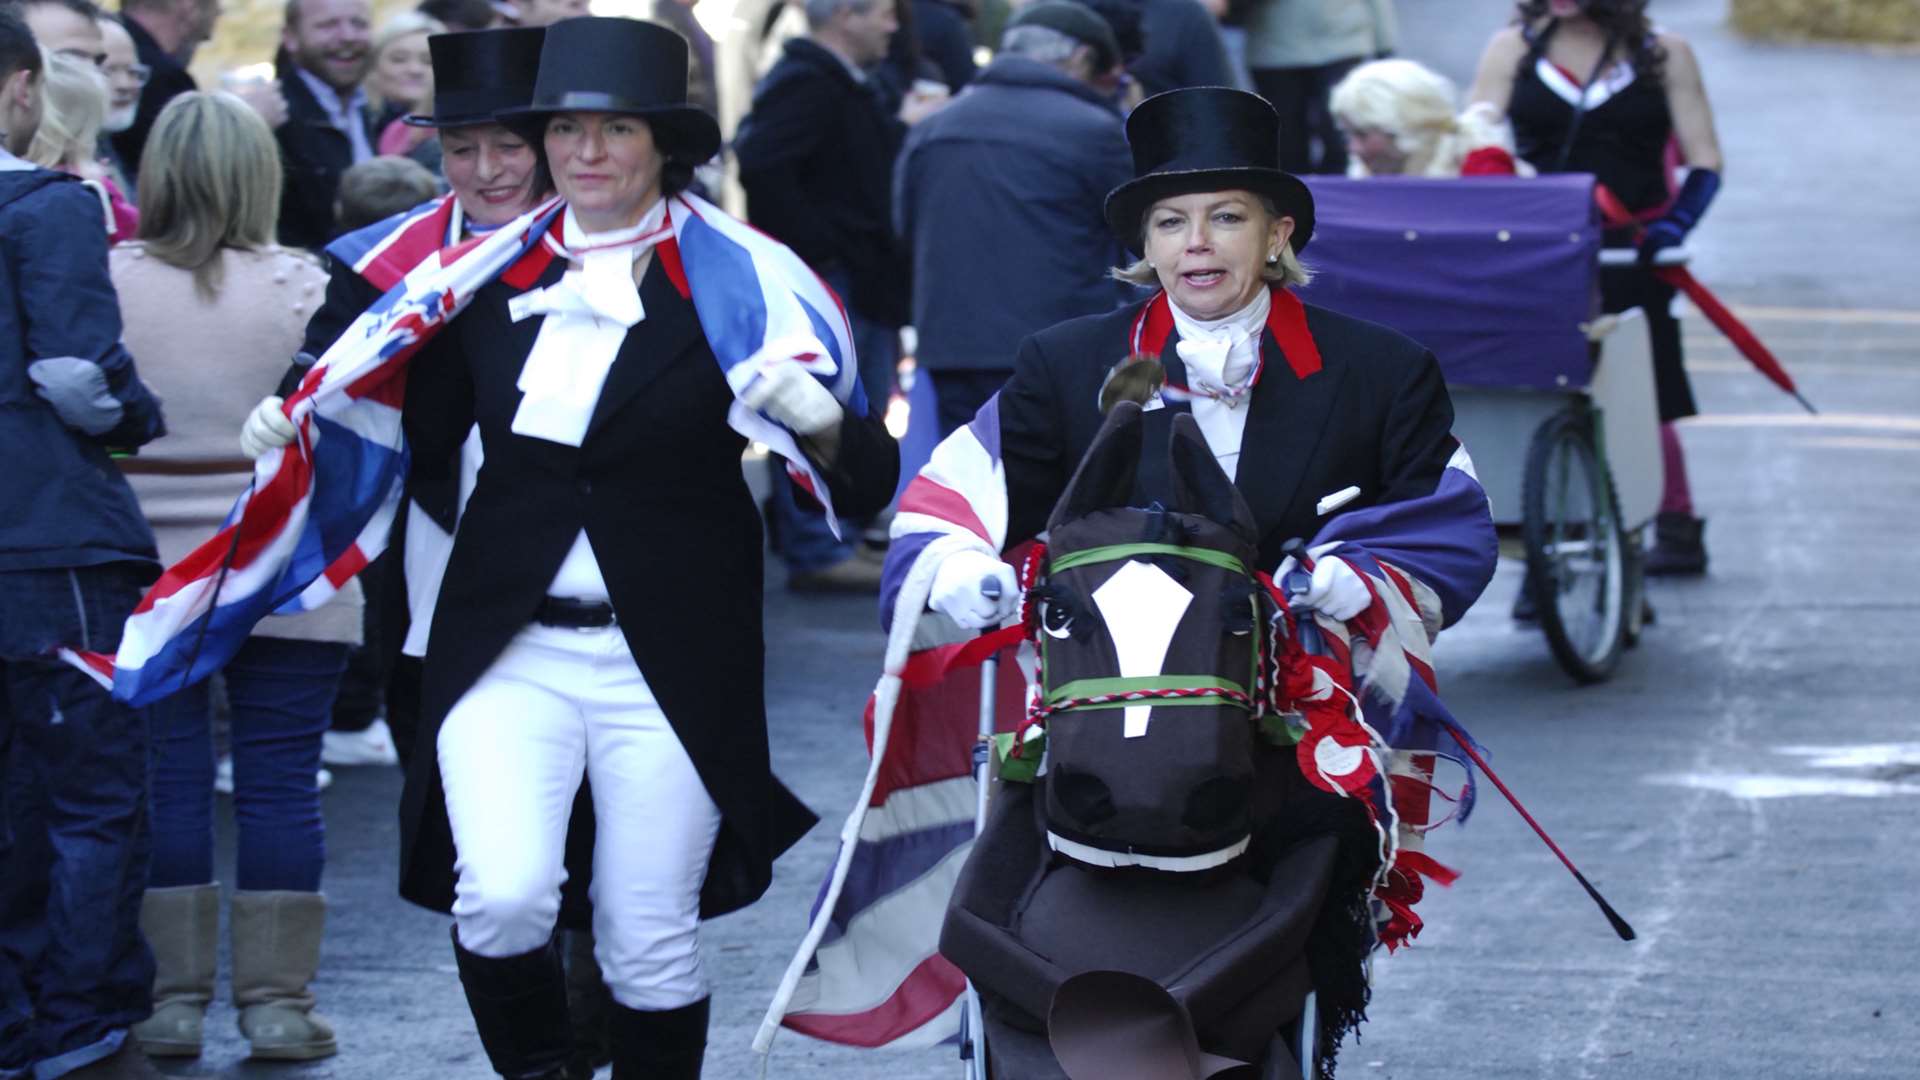 The Olympic Equestrian Dressage Team at the Sutton Valence Pram Race